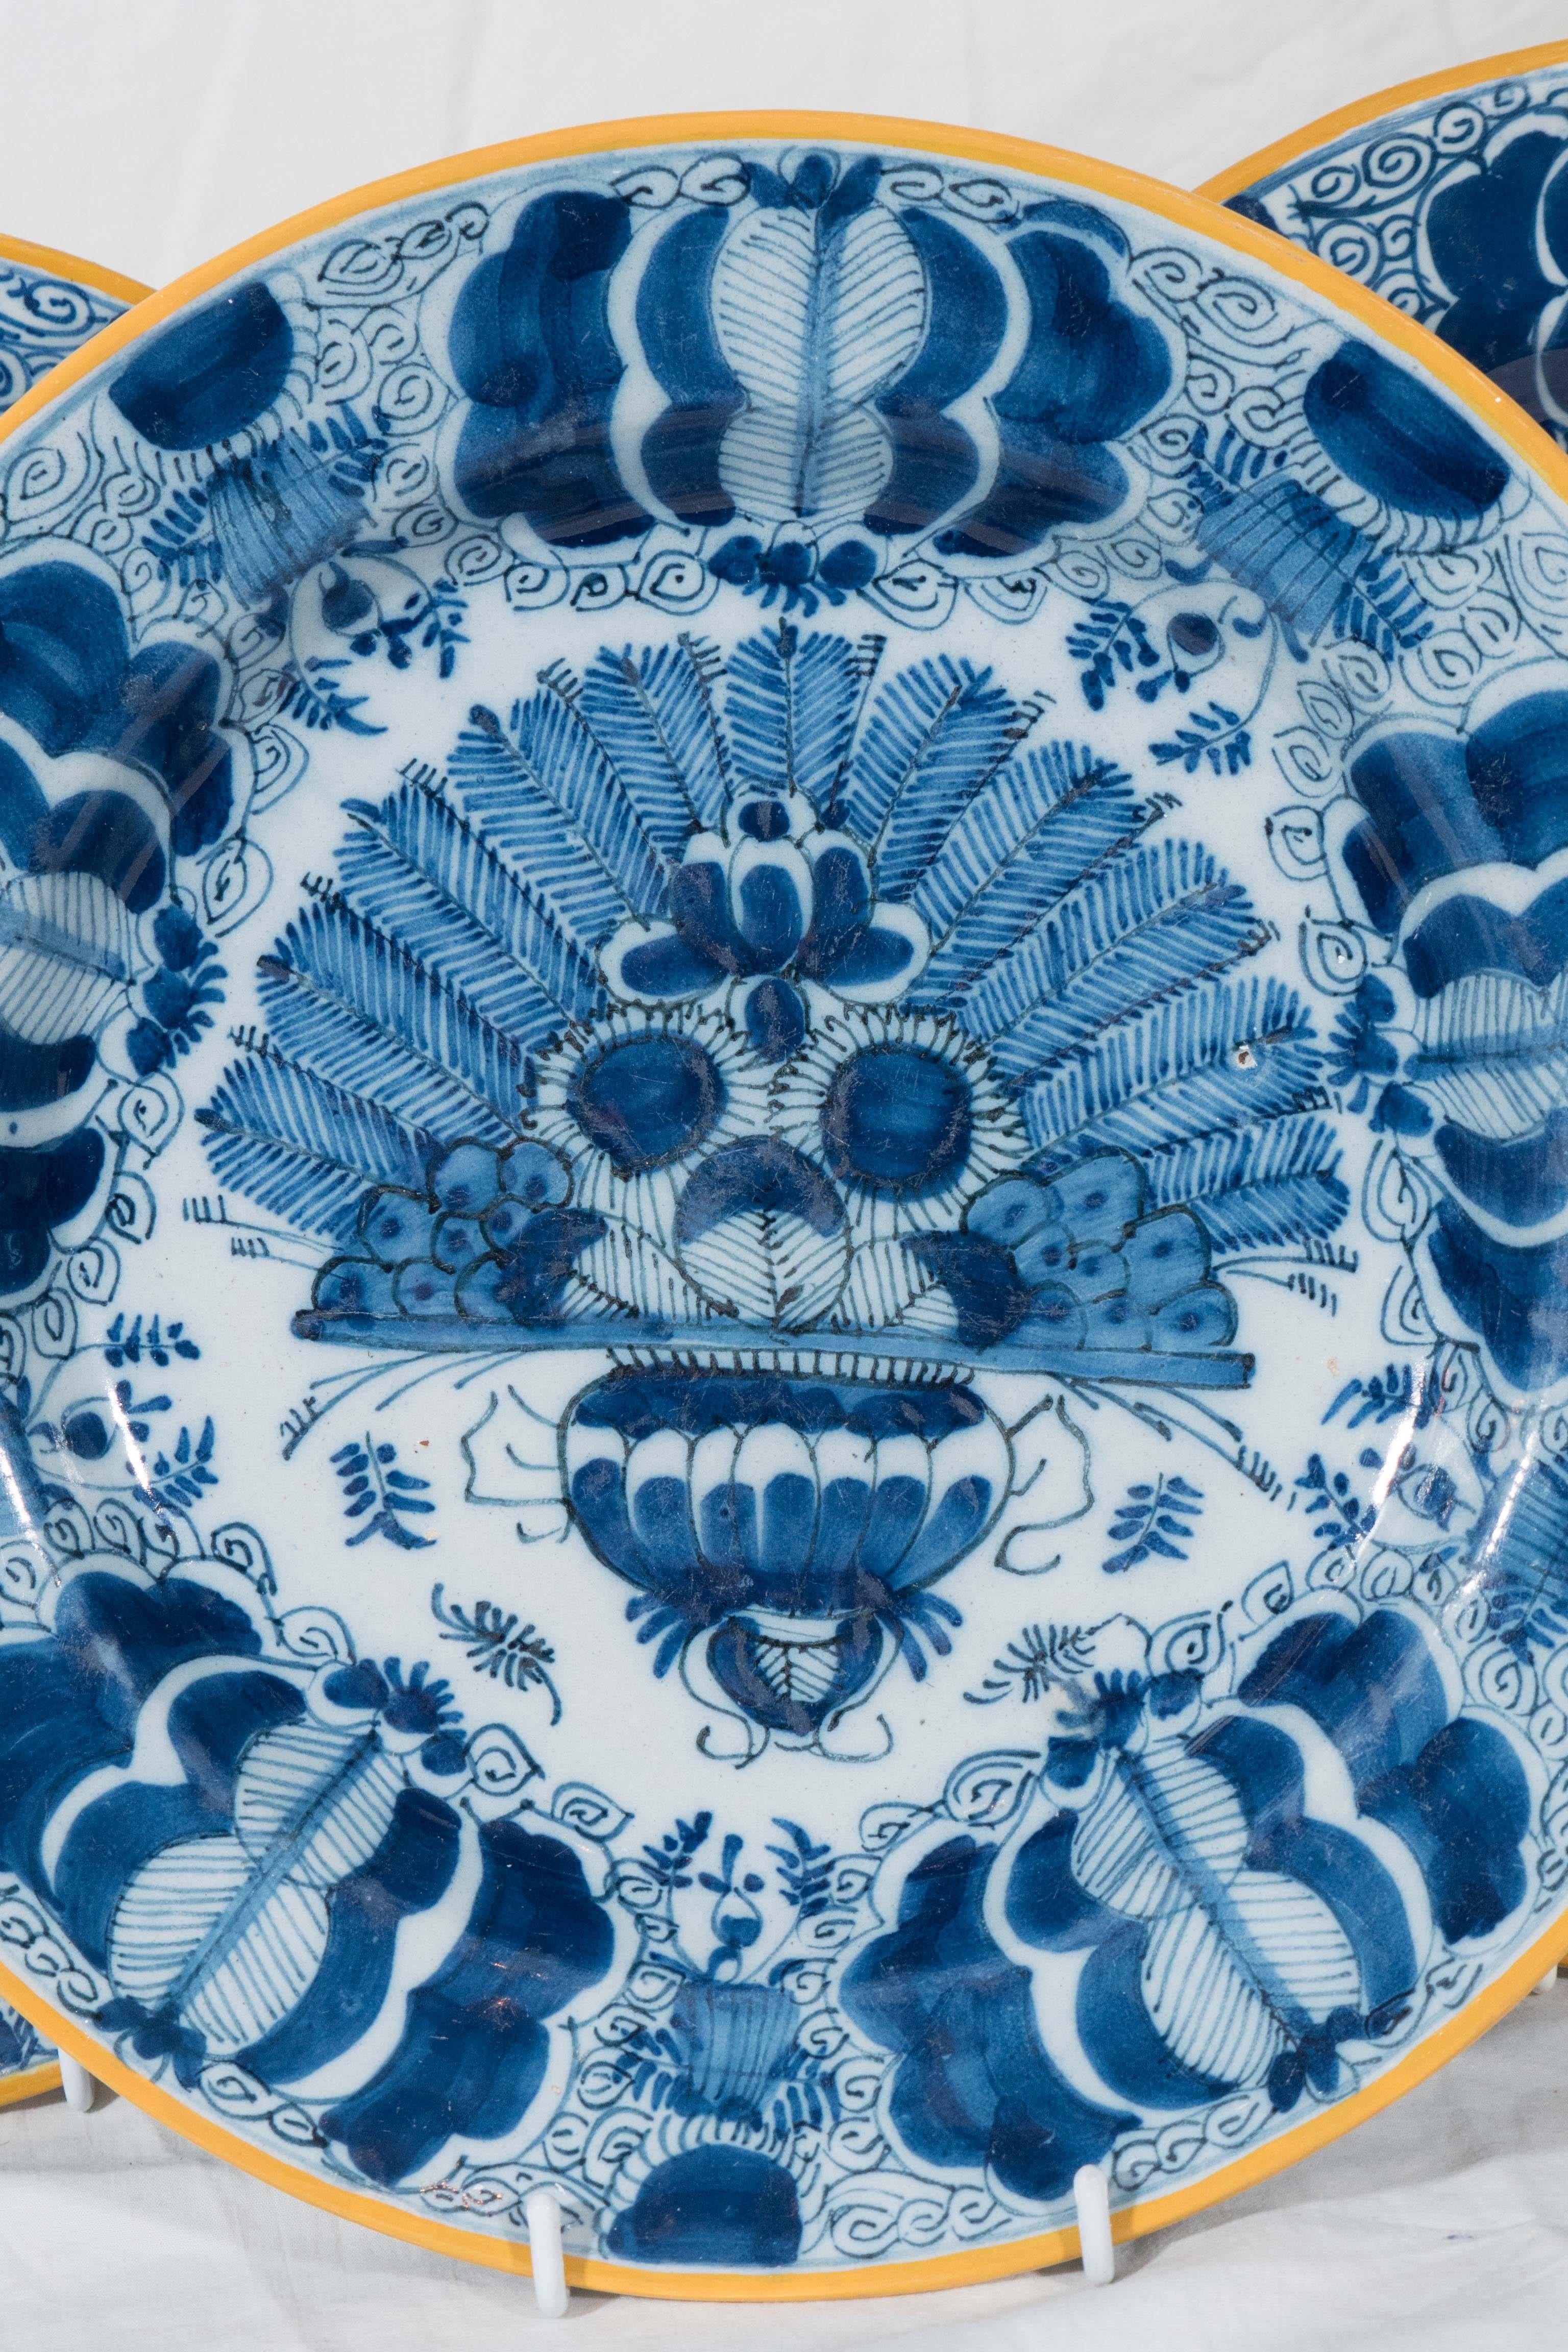 Chinoiserie Antique Blue and White Dutch Delft Chargers 